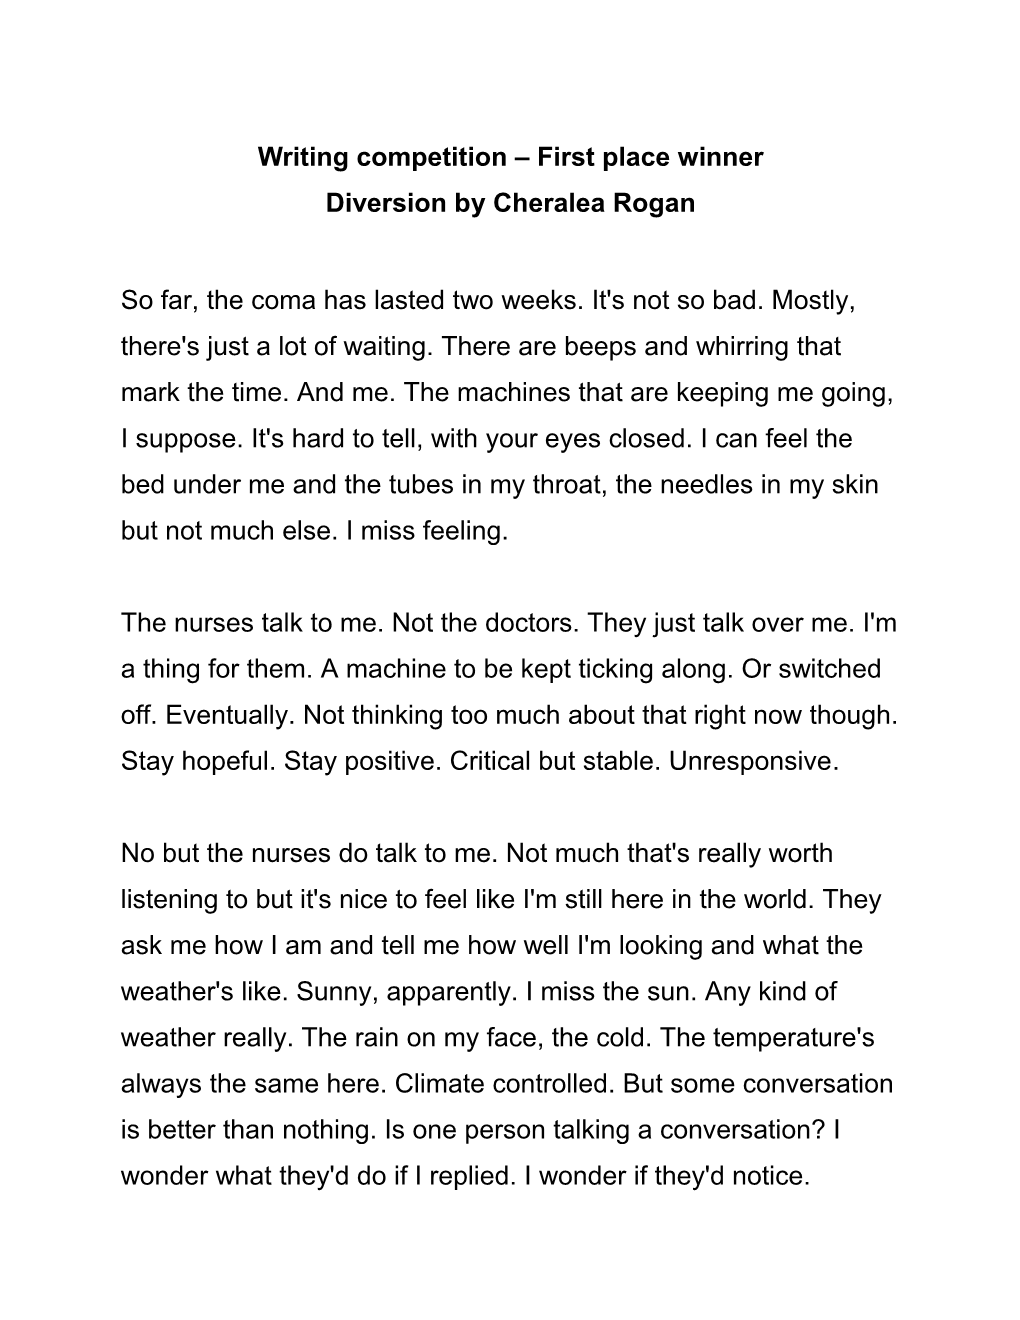 Writing Competition First Place Winner Diversion by Cheralea Rogan